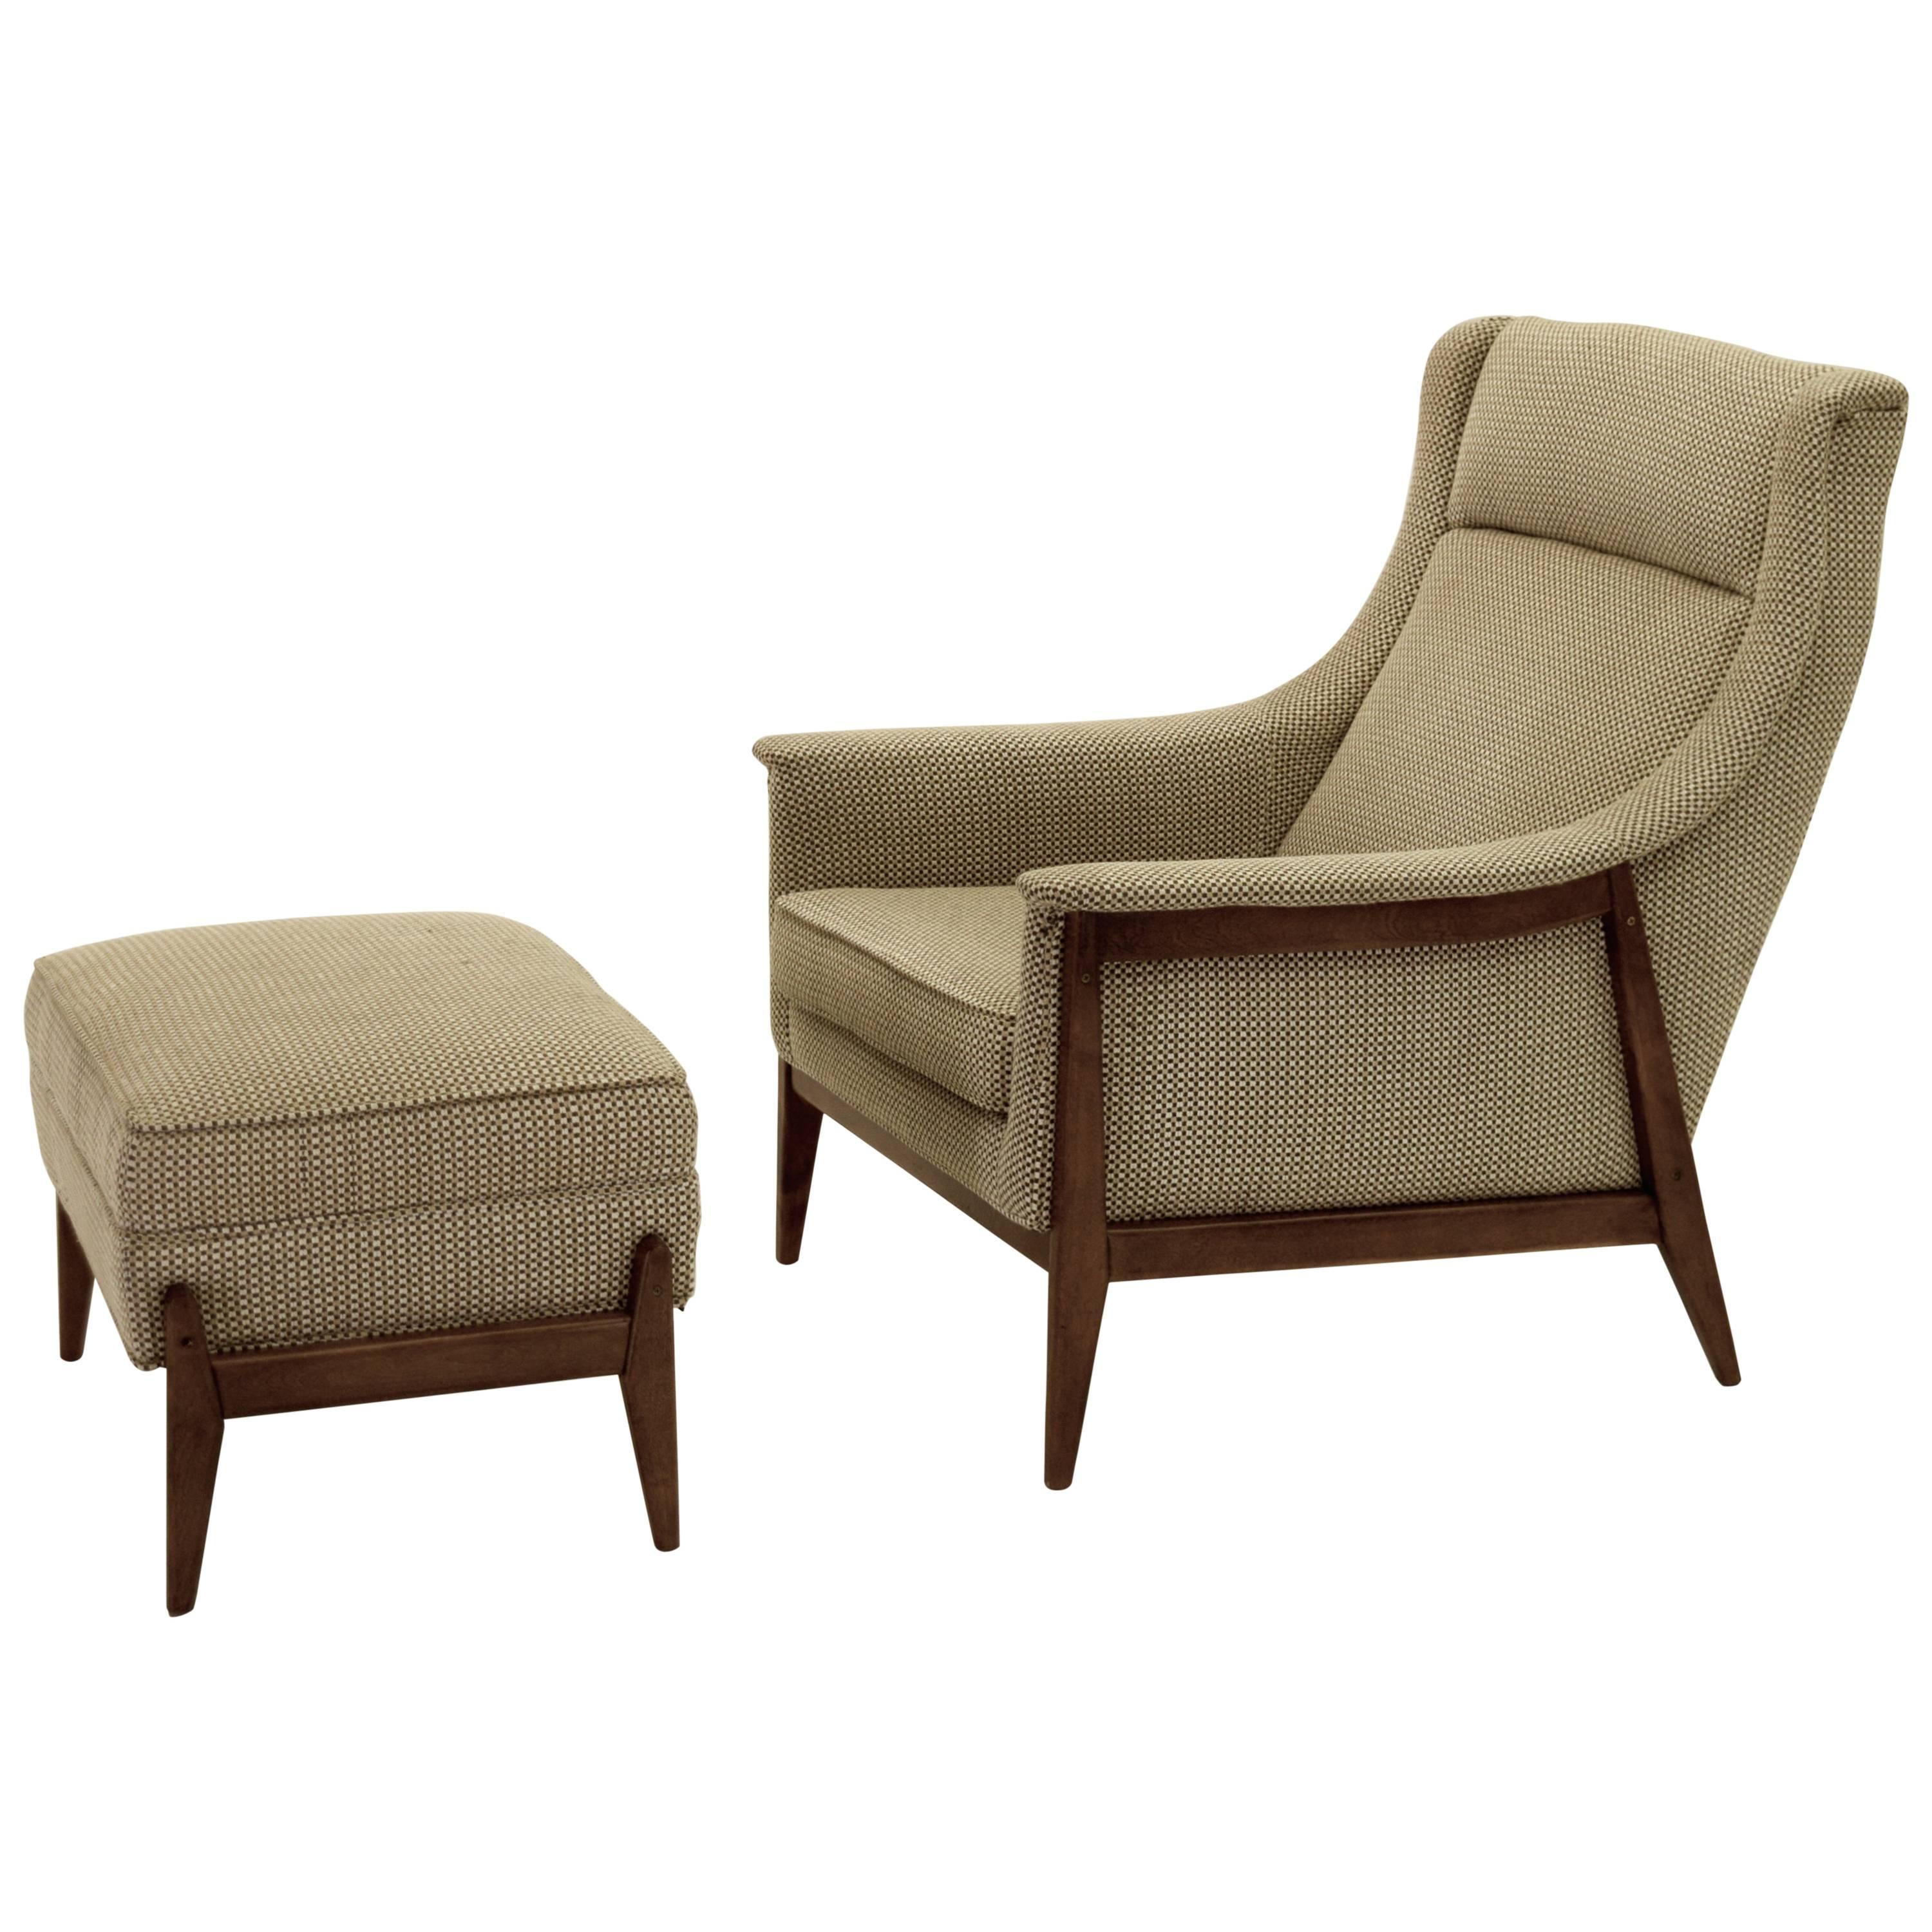 Exquisite Armchair and Ottoman by Selig in Original Cotton Felt